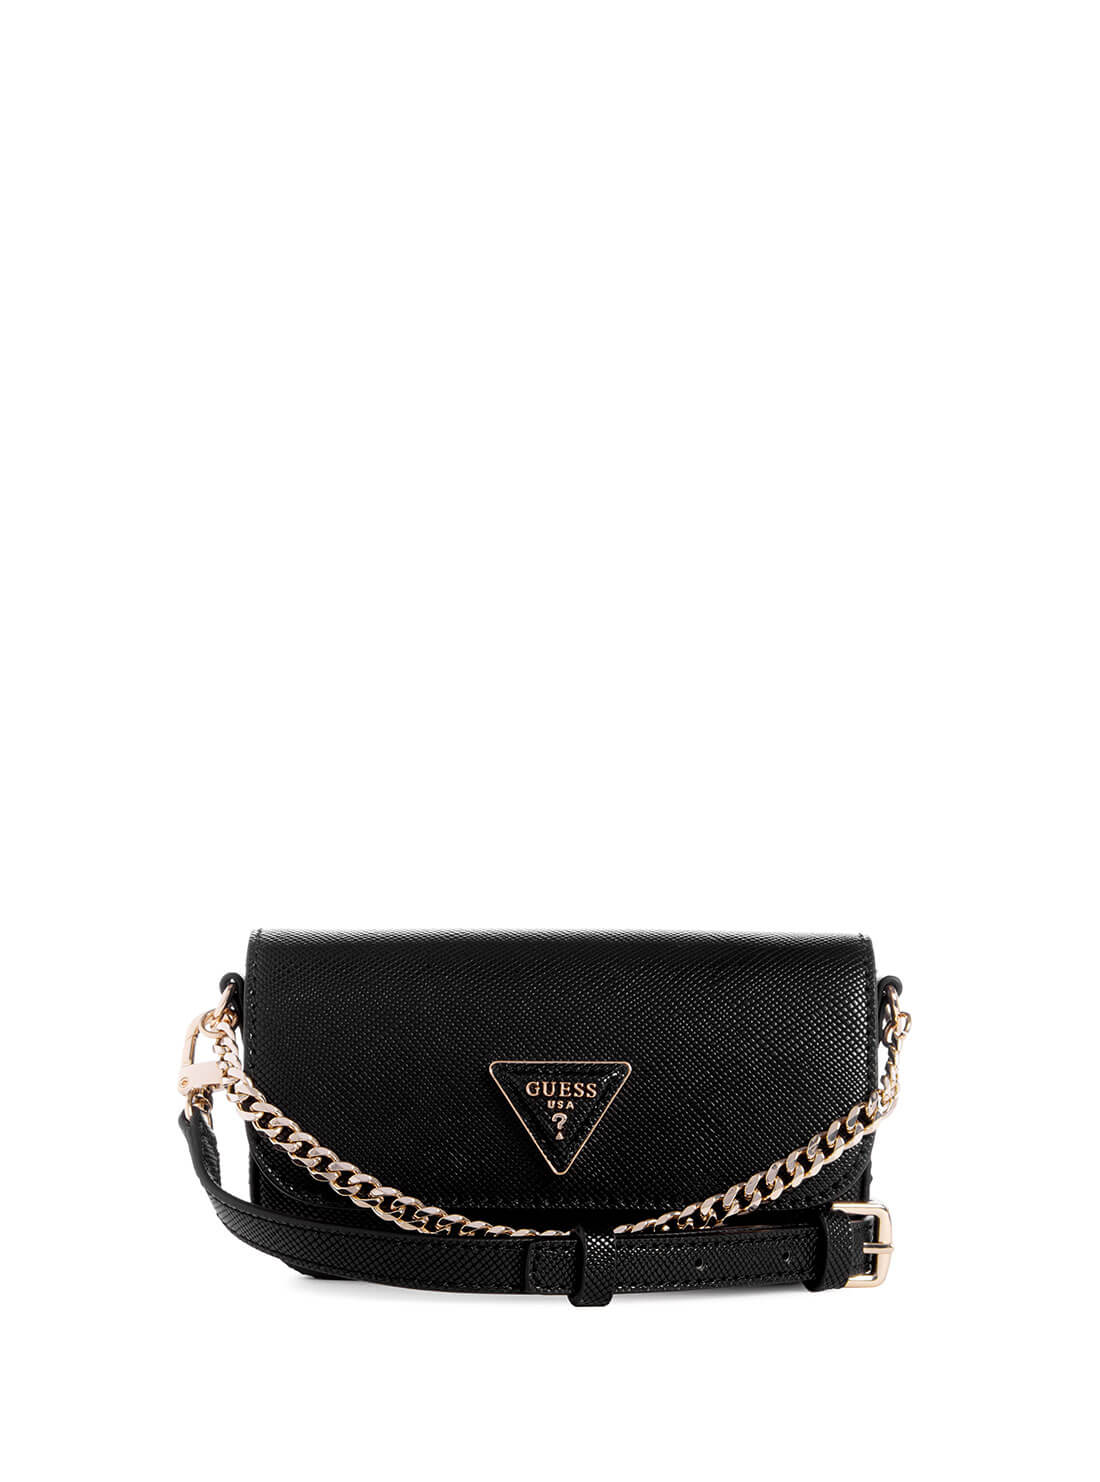 Women's Black Brynlee Micro Mini Shoulder Bag front view